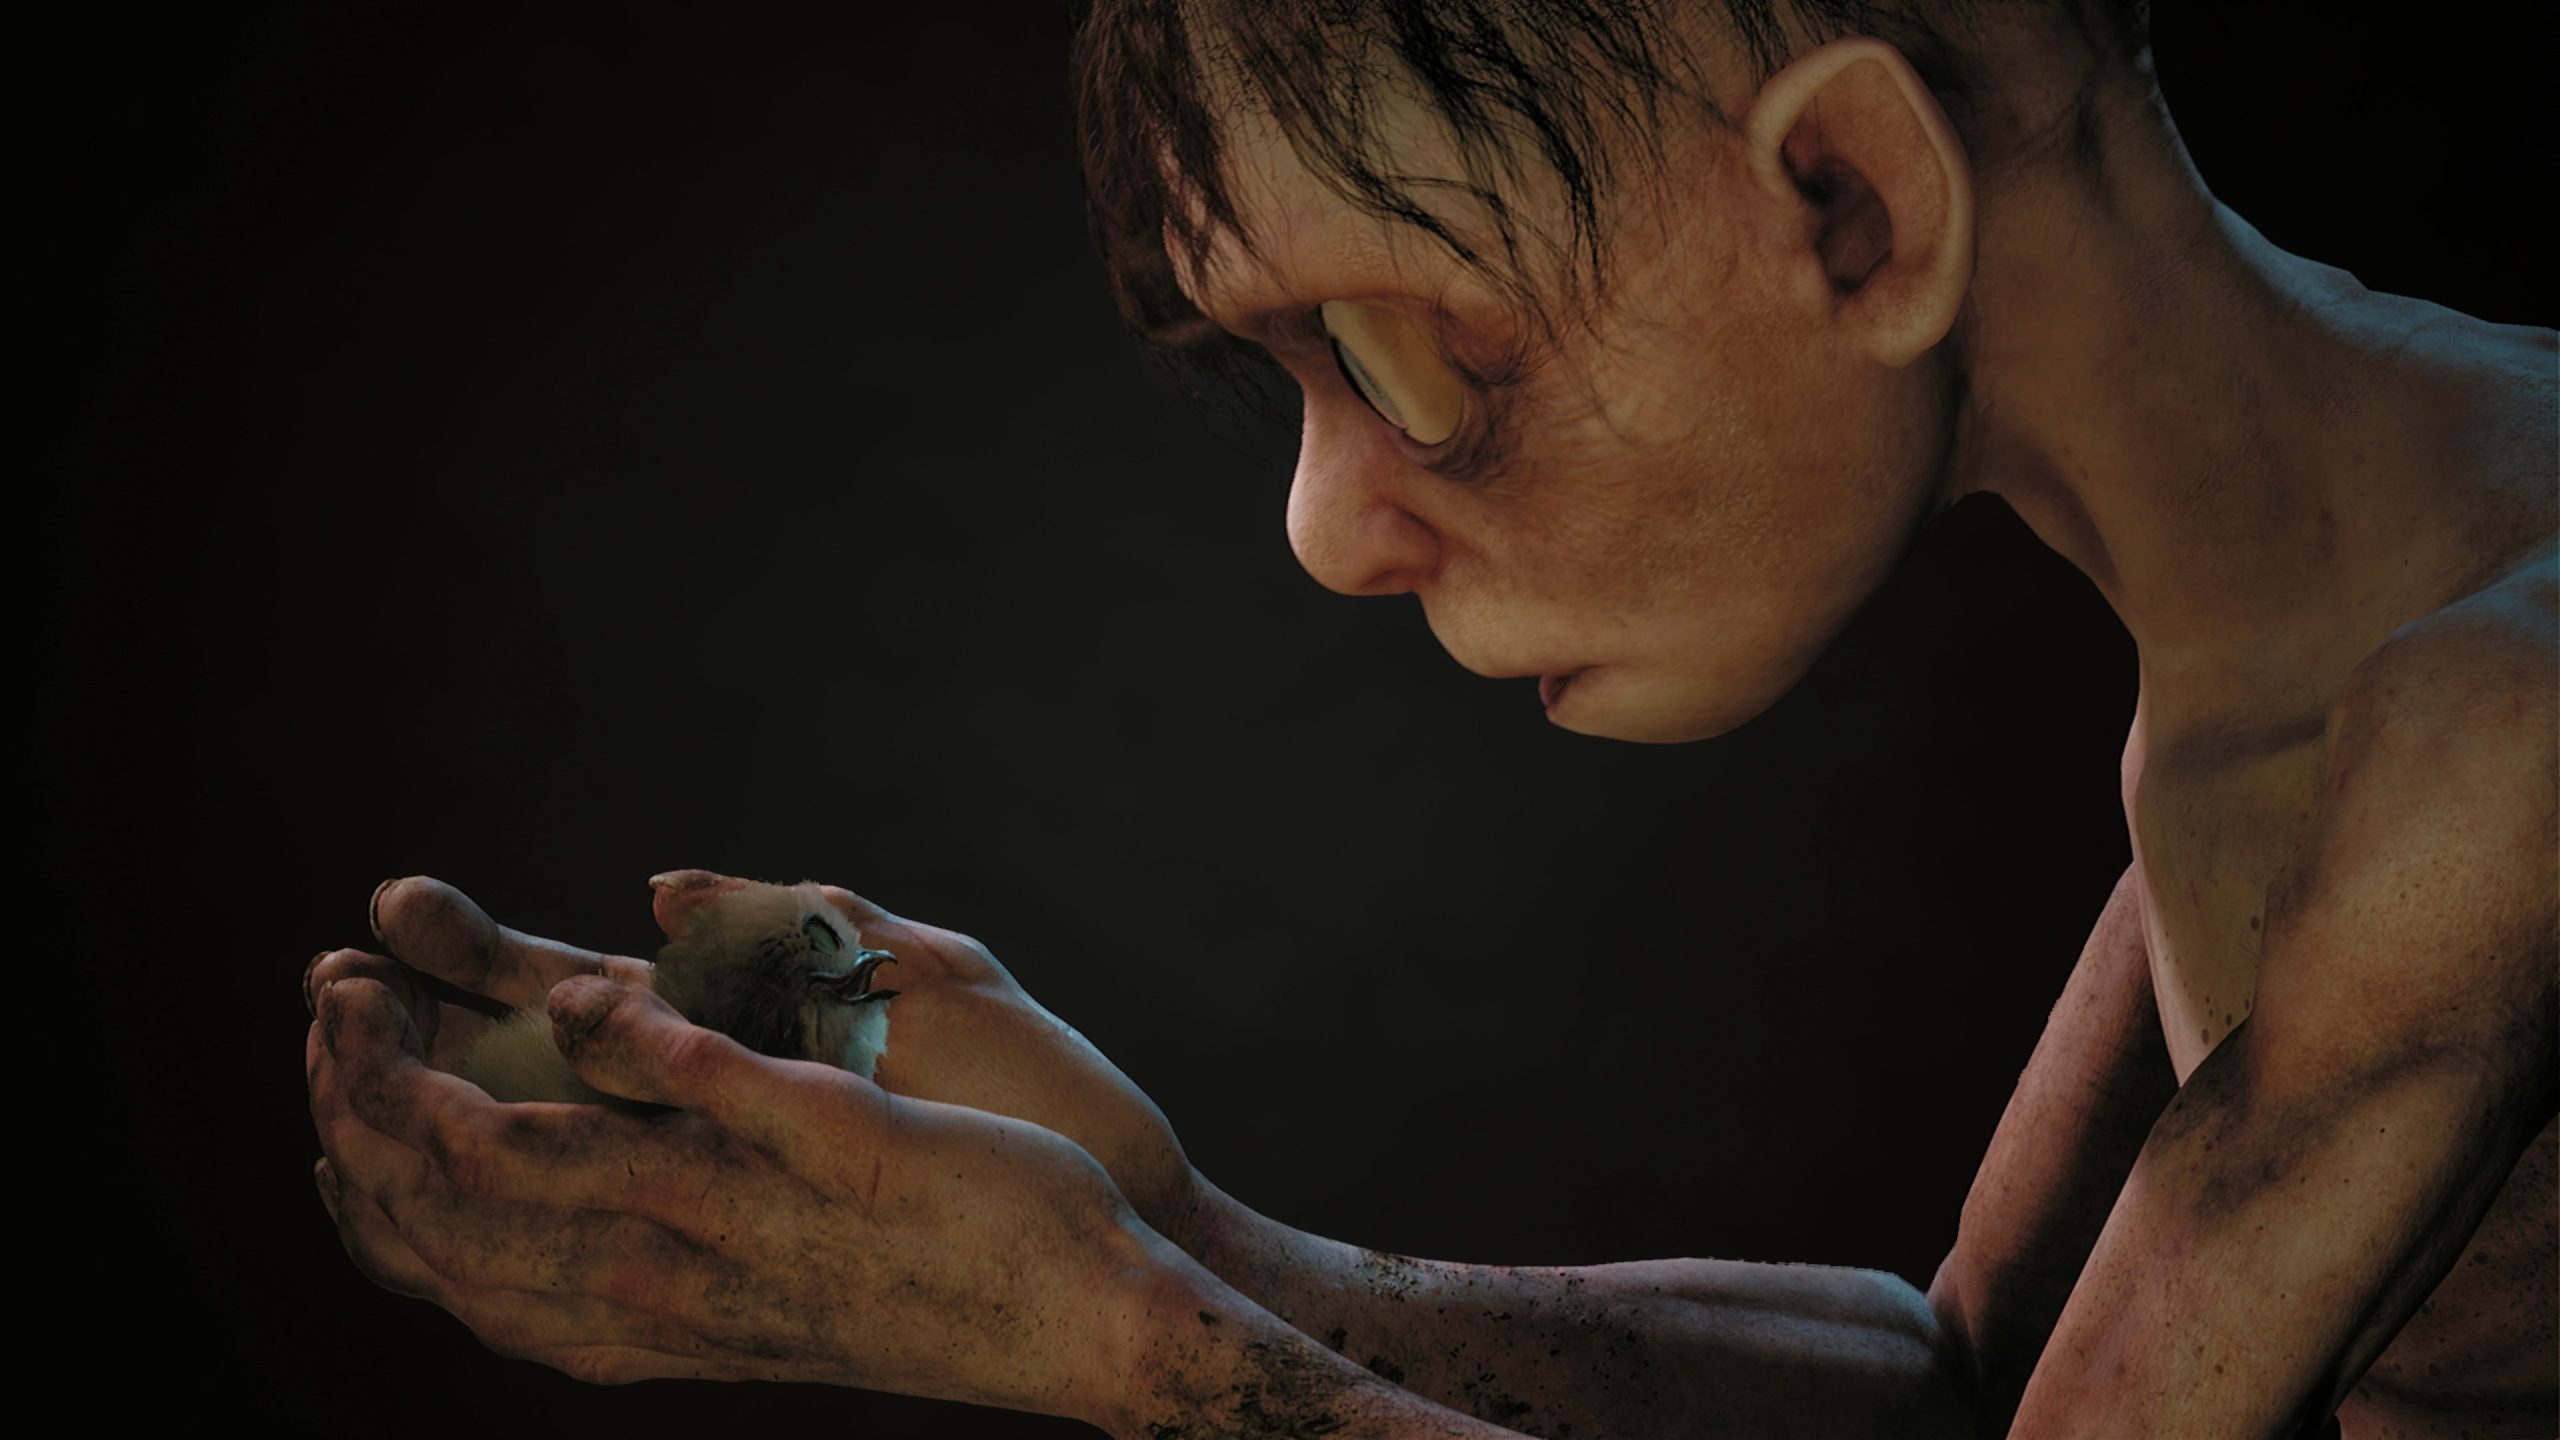 Lord of the Rings: Gollum' hits consoles and PC on September 1st